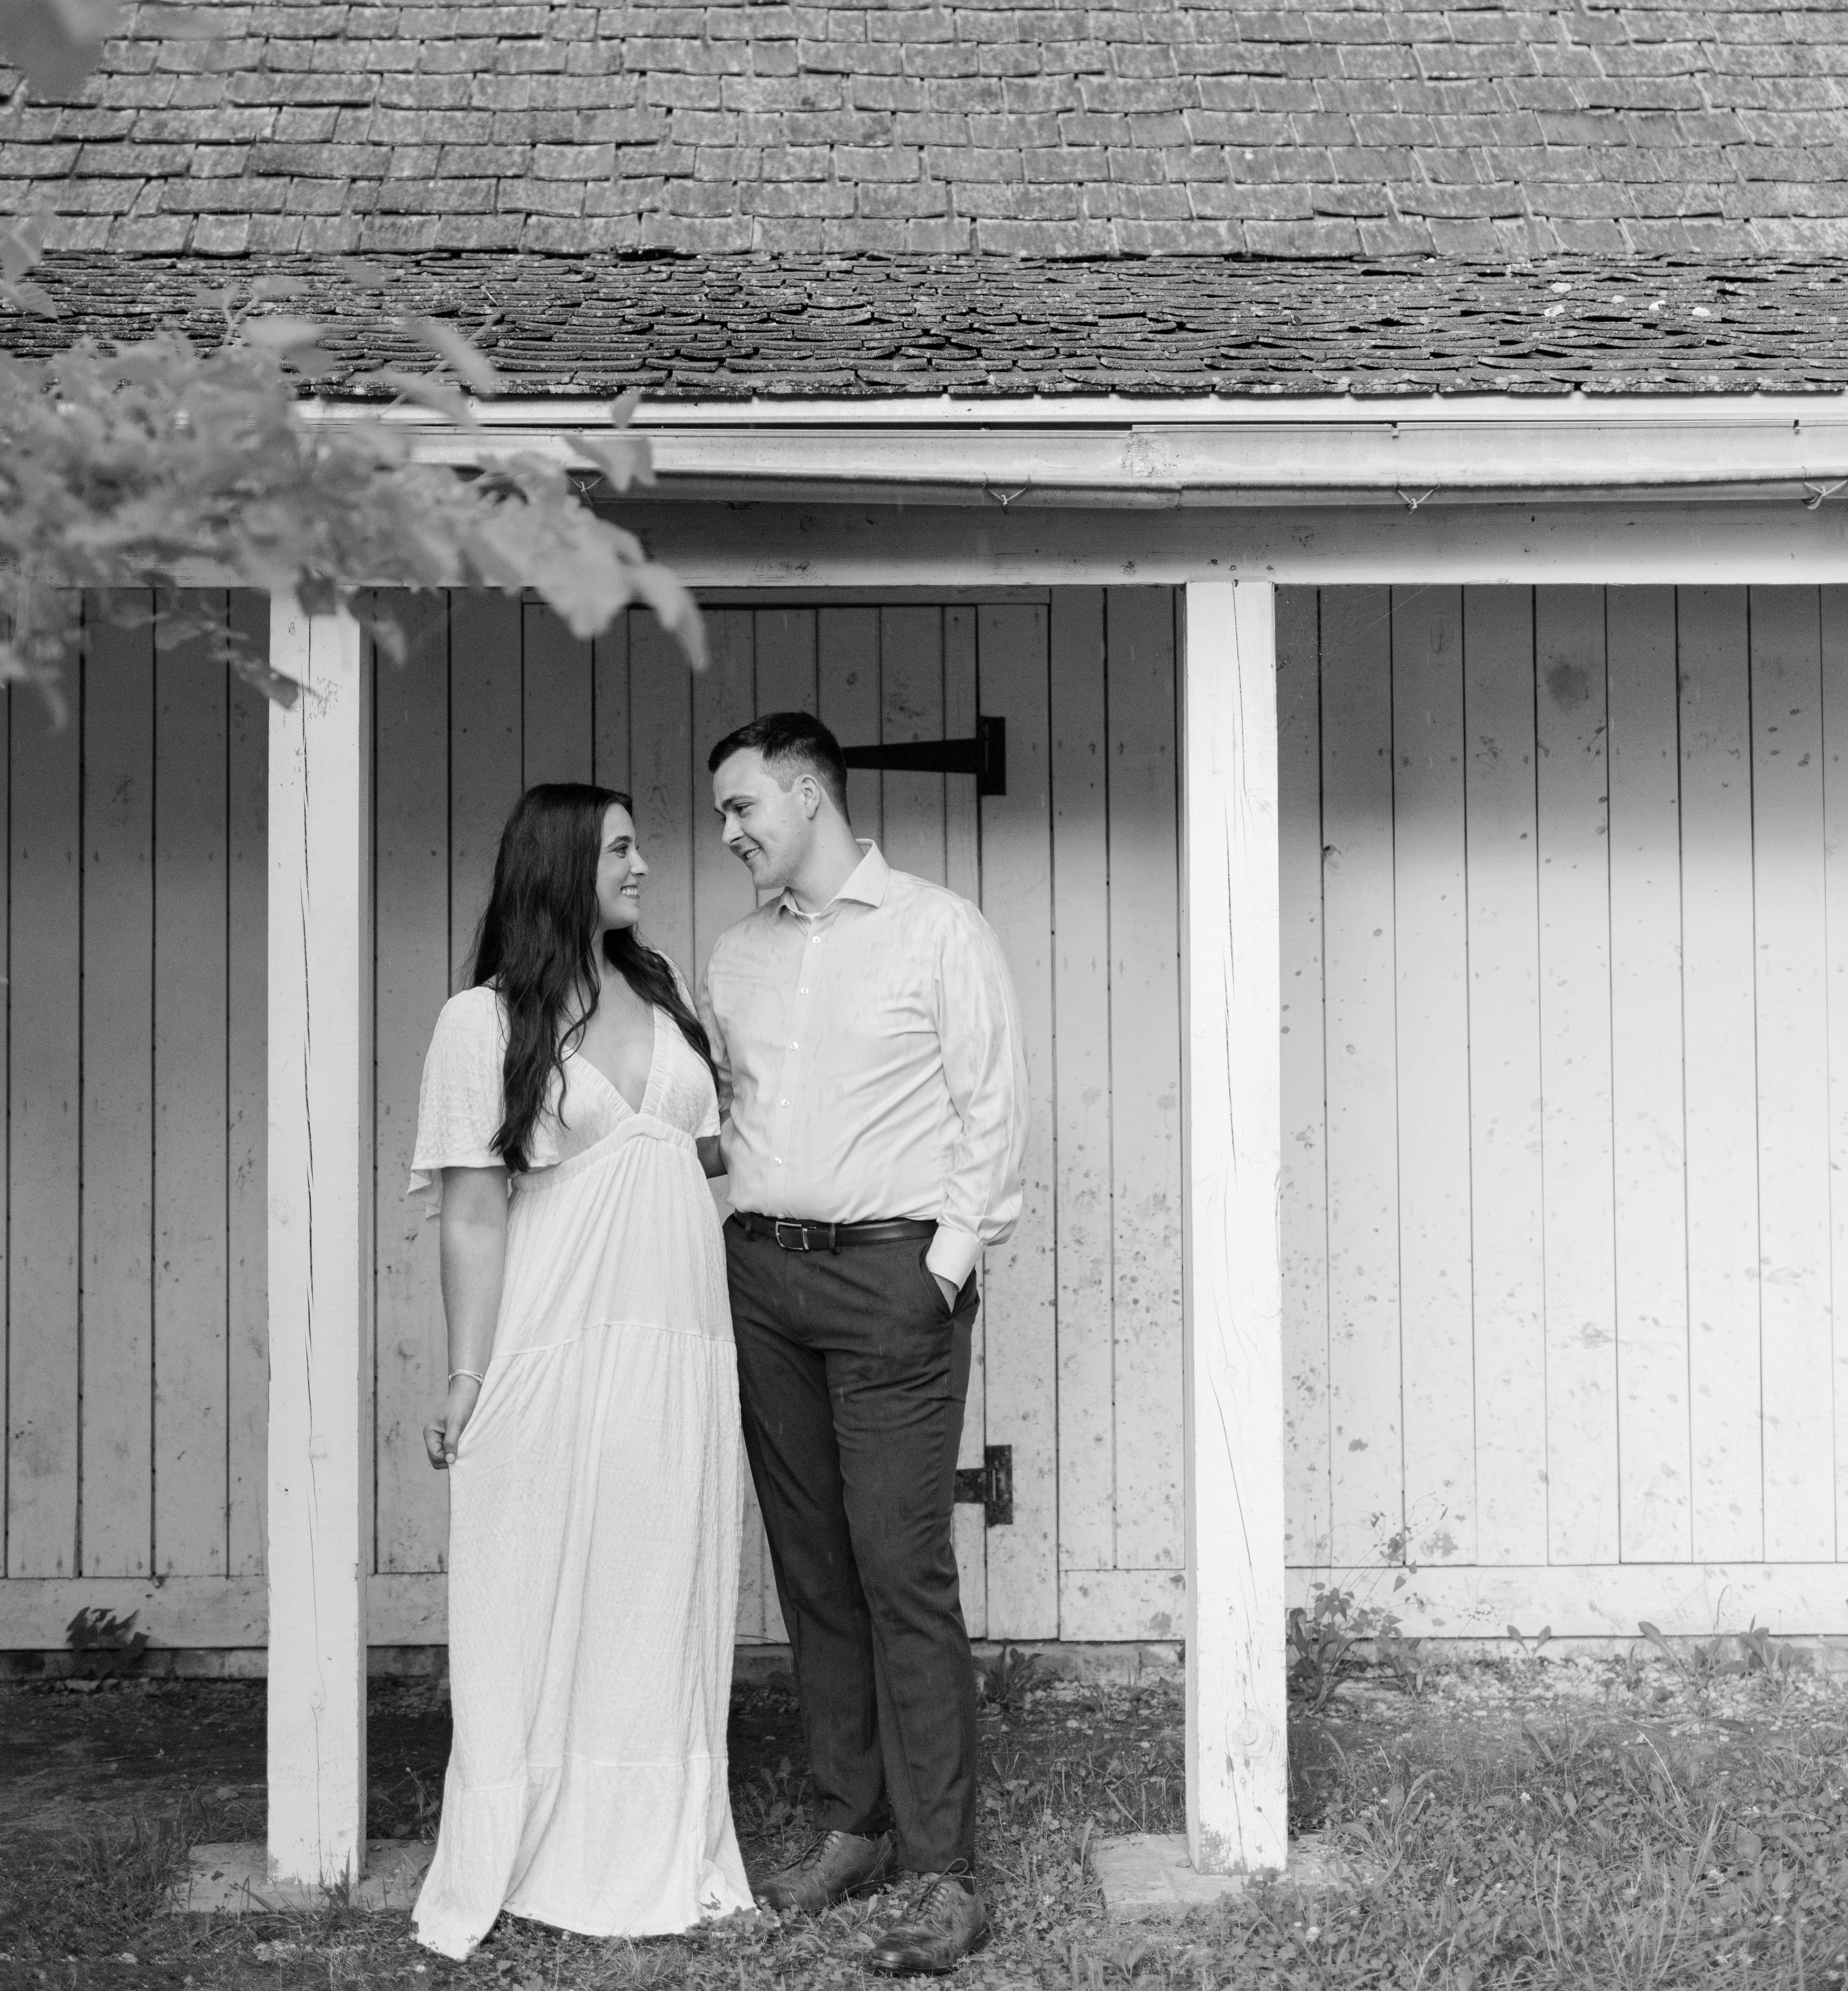 The Wedding Website of Taylor McMahon and Nick Kane